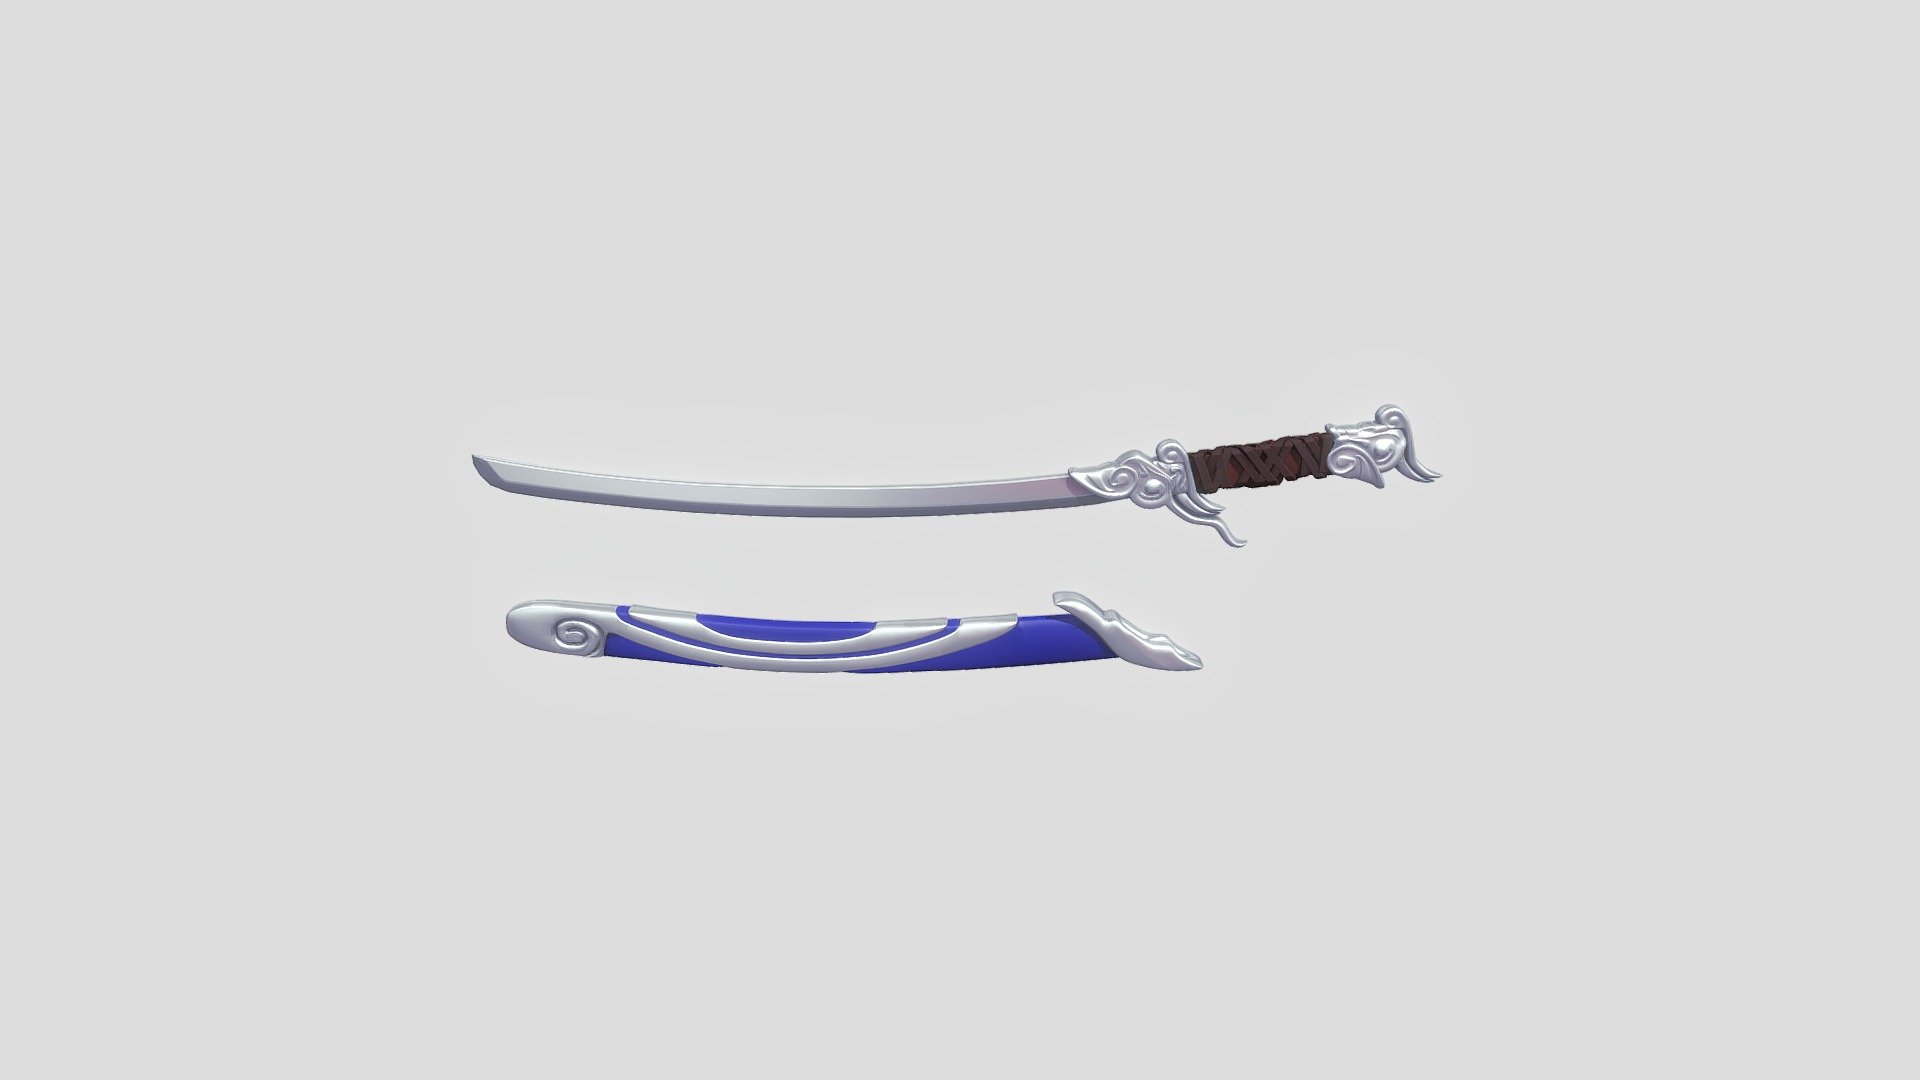 This is Yasuo’s weapon from League of Legends. I made them for a friend to use in his animation 3d model